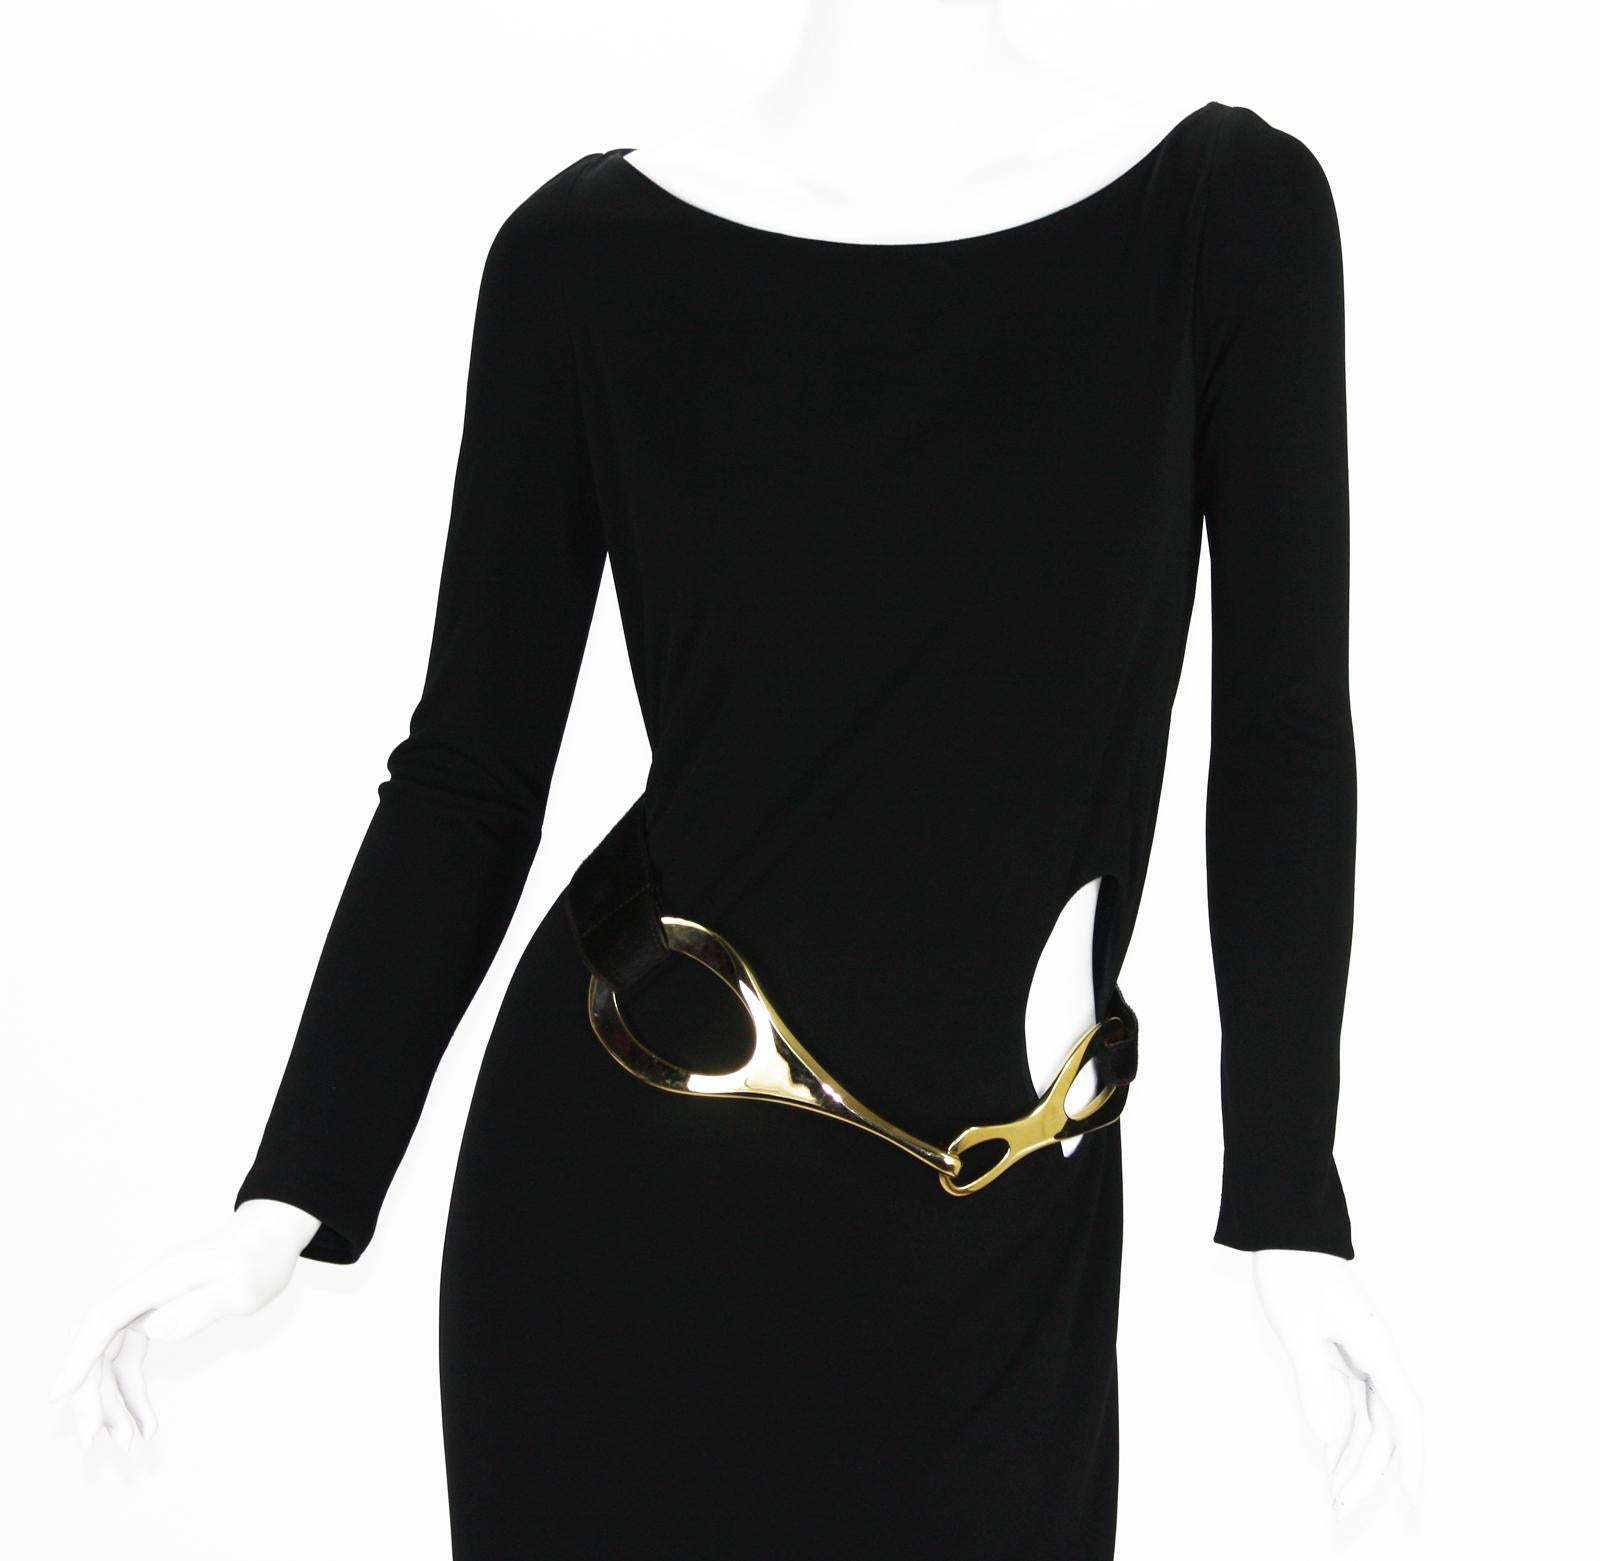 Vintage Tom Ford for Gucci F/W 1996 Black Jersey Dress Gown w Pony Hair Belt 42 In Excellent Condition For Sale In Montgomery, TX